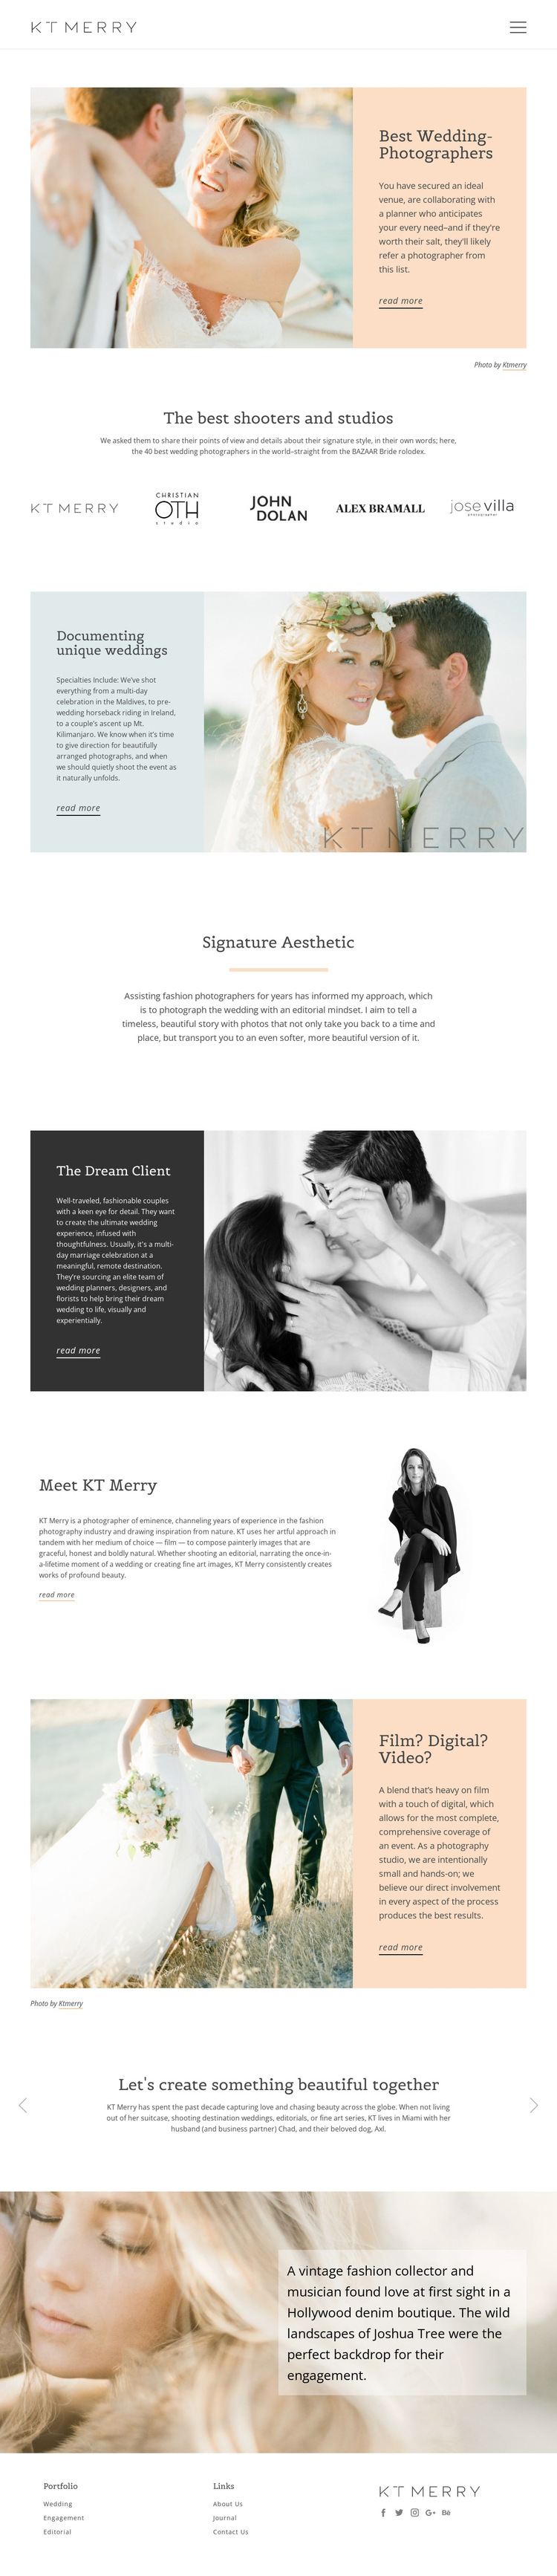 Shooters for special wedding HTML5 Template